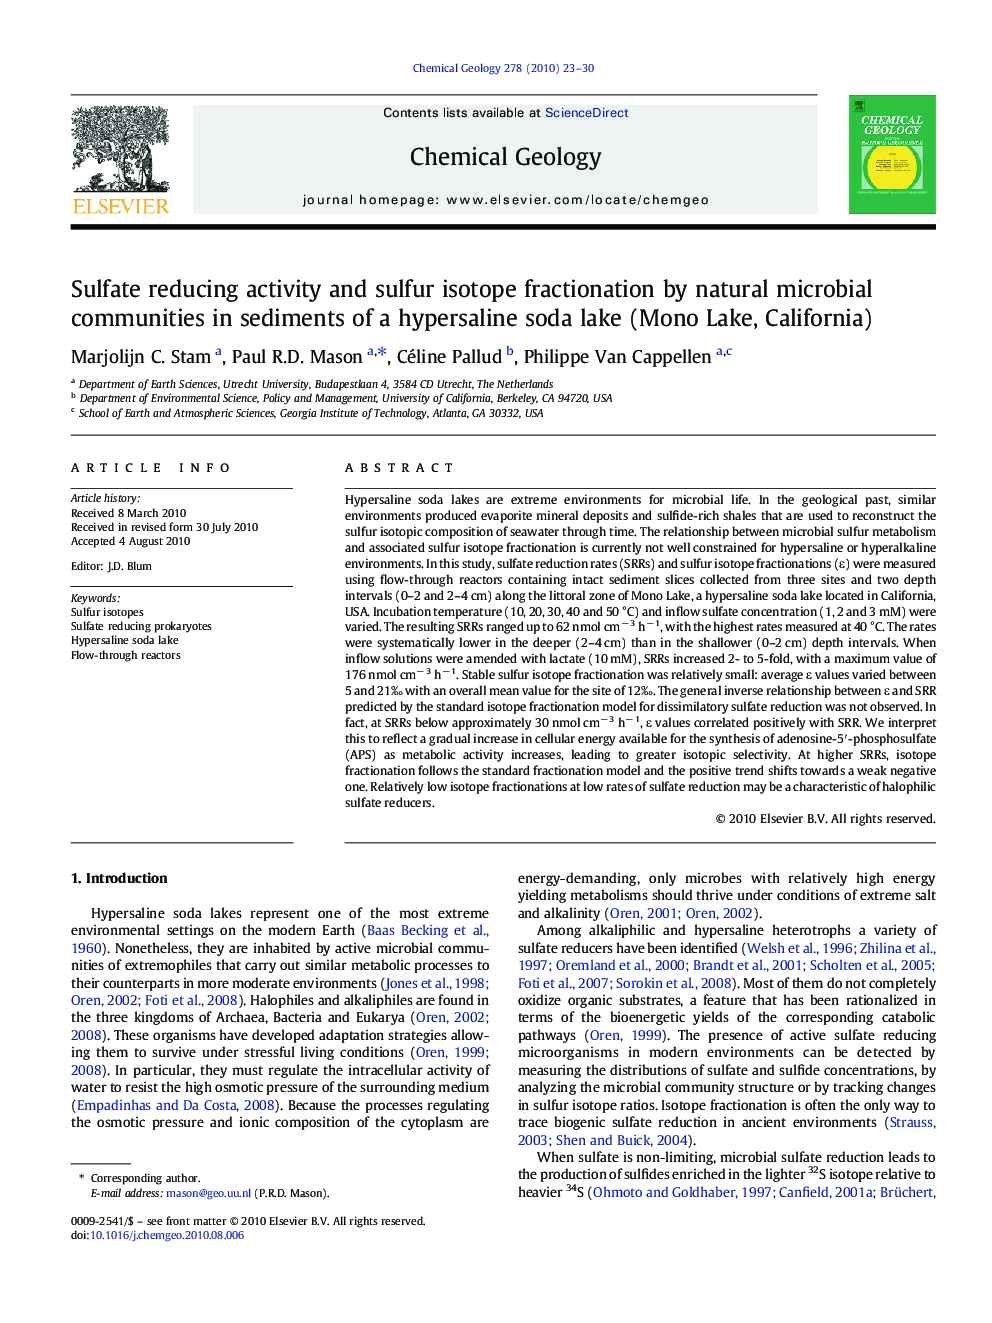 Sulfate reducing activity and sulfur isotope fractionation by natural microbial communities in sediments of a hypersaline soda lake (Mono Lake, California)